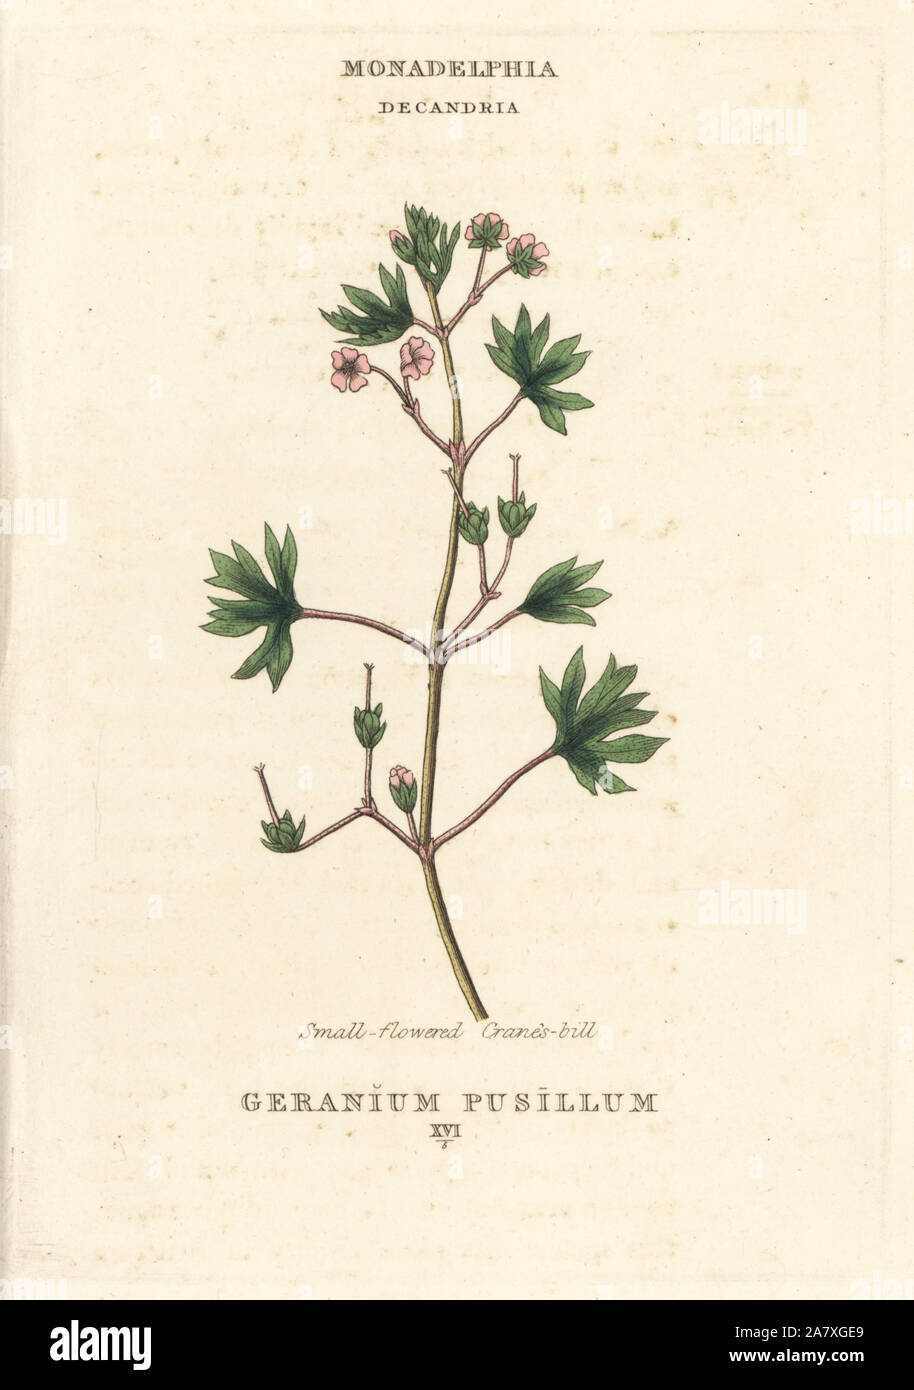 Small-flowered cranes-bill, Geranium pusillum. Handcoloured copperplate engraving after an illustration by Richard Duppa from his The Classes and Orders of the Linnaean System of Botany, Longman, Hurst, London, 1816. Stock Photo